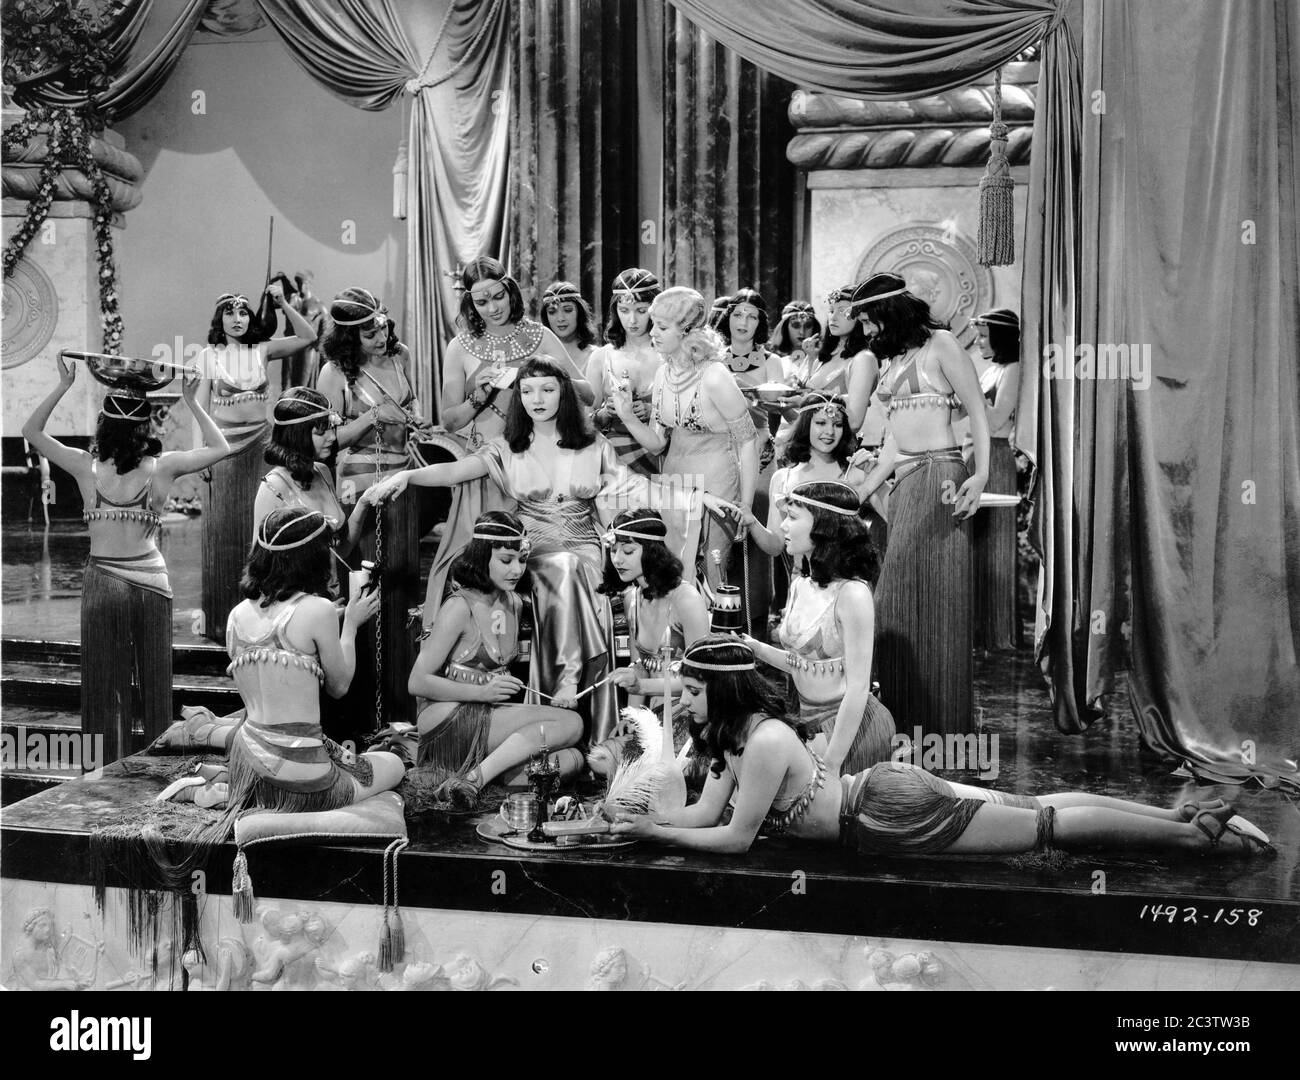 CLAUDETTE COLBERT with Handmaidens including blonde GRACE DURKIN as Iras in CLEOPATRA 1934 director CECIL B. DeMILLE Miss Colbert costume Travis Banton photo by Ray Jones Paramount Pictures Stock Photo